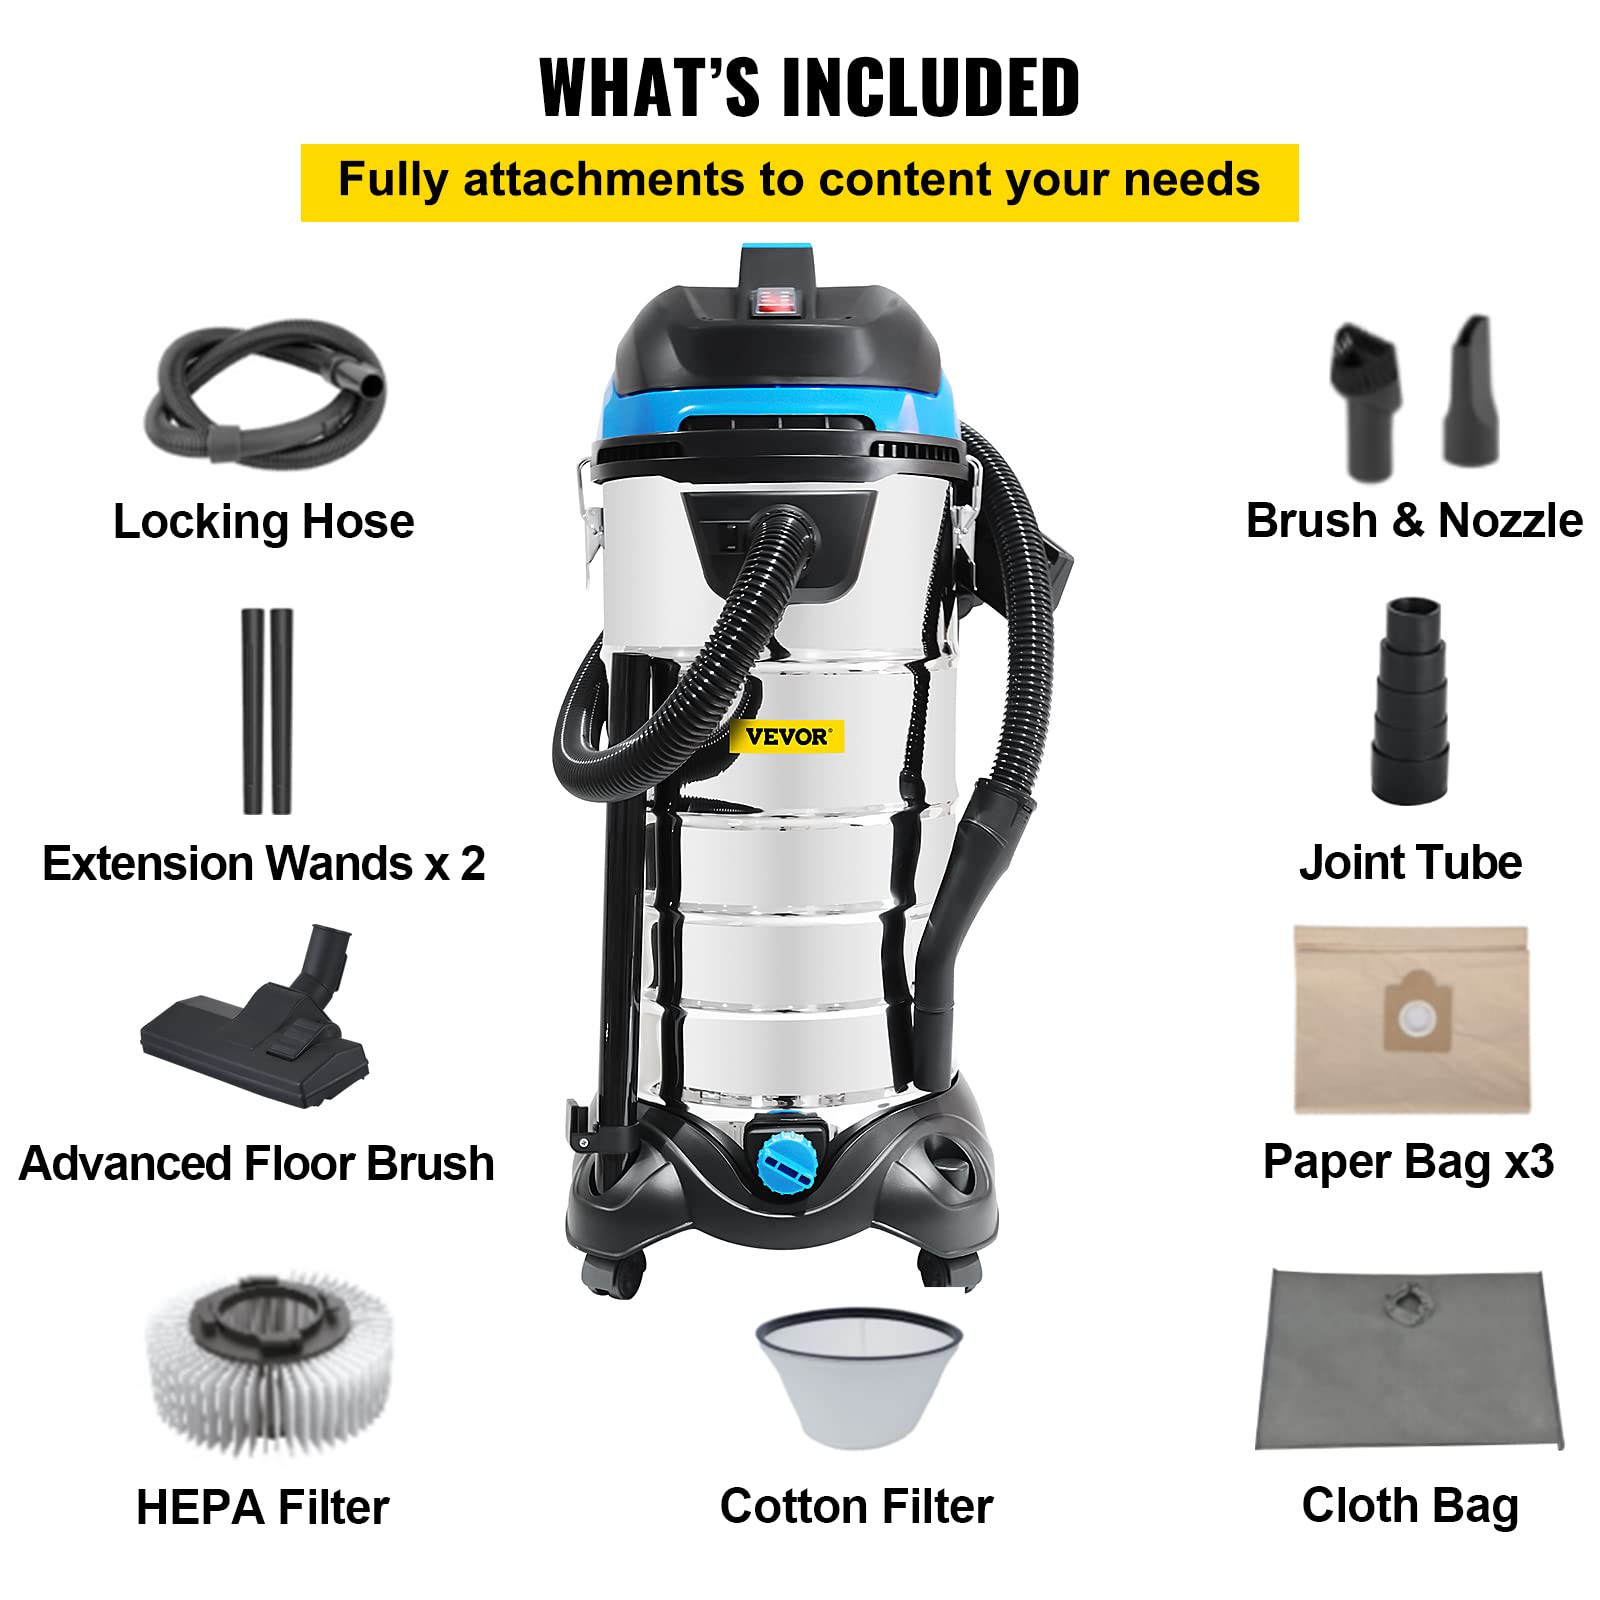 VEVOR Extractor Collector, 11 Gallon Capacity, HEPA Filtration System Automatic Dust Shaking, 1200W Powerful Motor Wet & Dry Vacuum Cleaner, 11 GAL, Silver